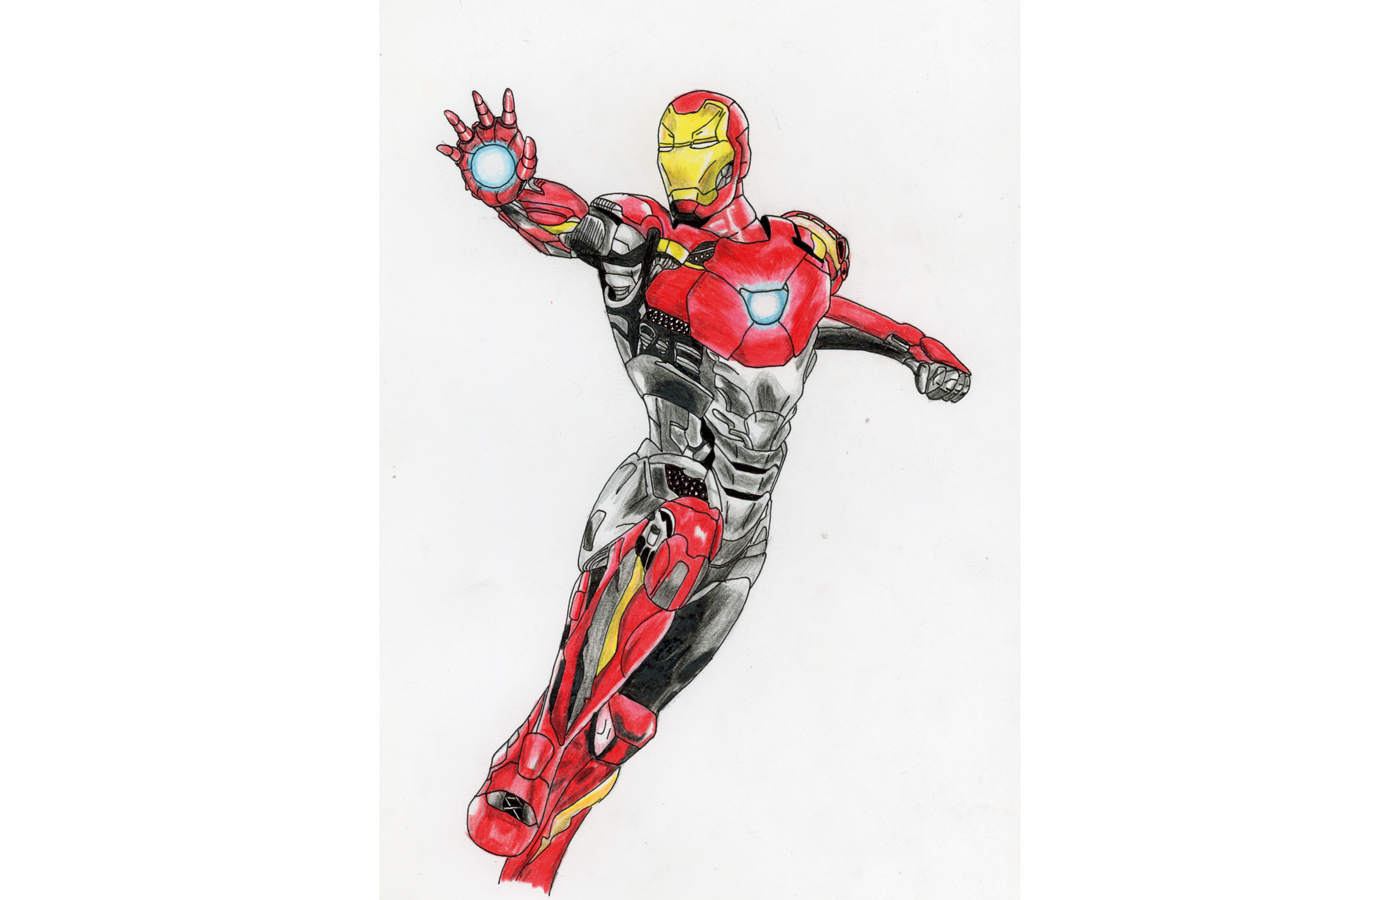 Iron man, made of color pencils in 2017